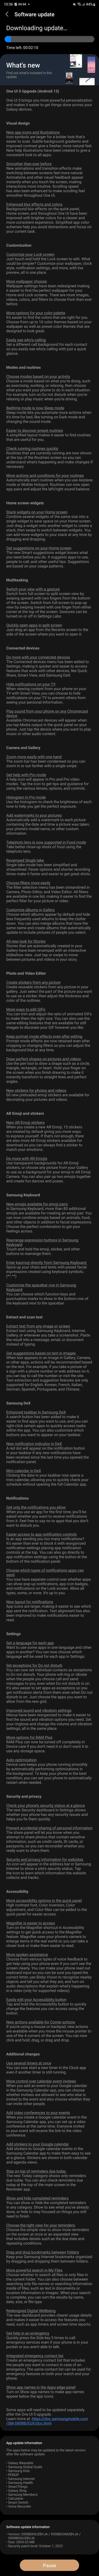 Here's a look at Galaxy S22 runnng Android 13 and One UI 5.0 beta